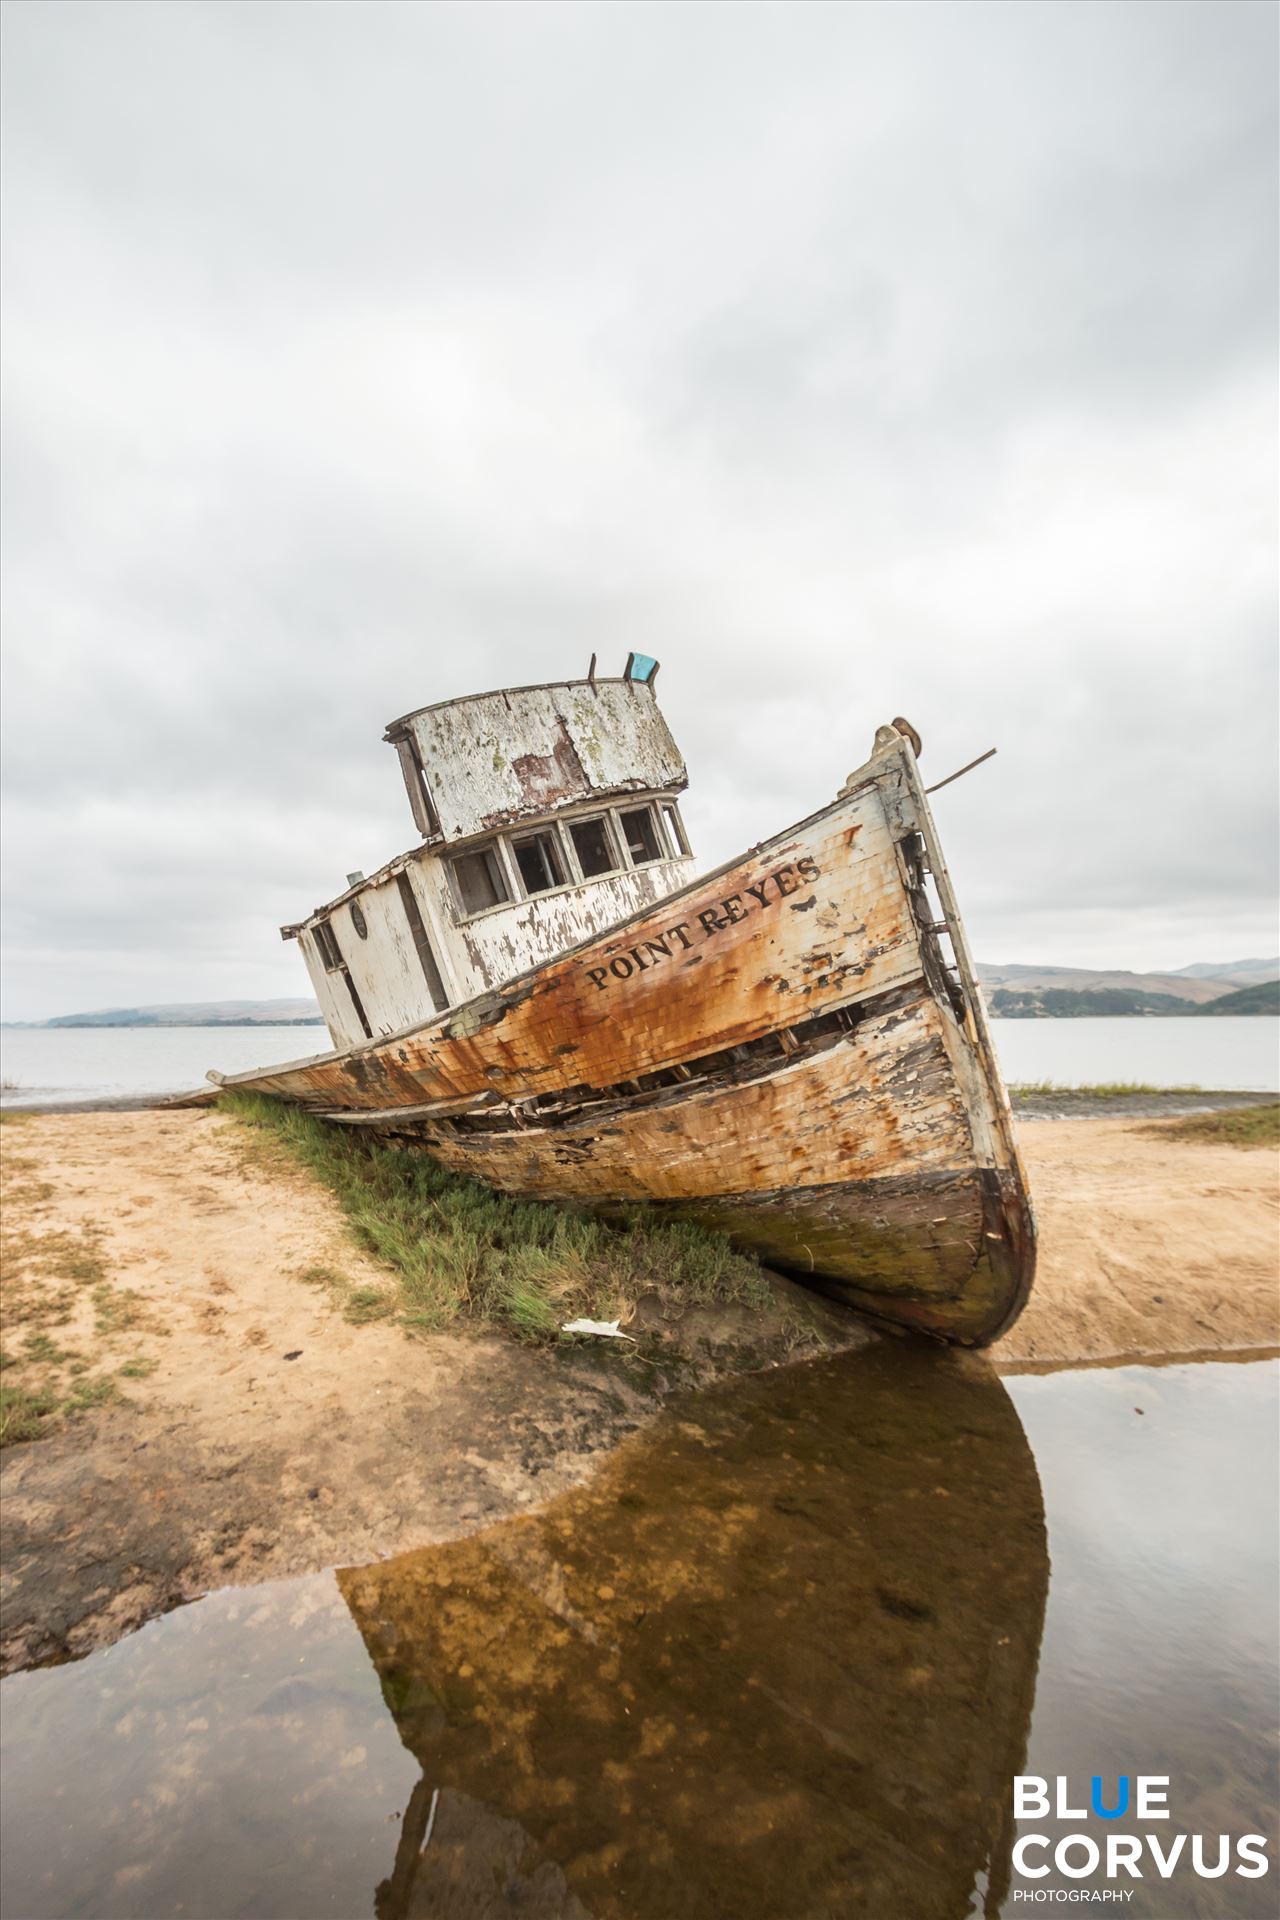 " The Shipwreck of Point Reyes" Vertical  by Eddie Zamora